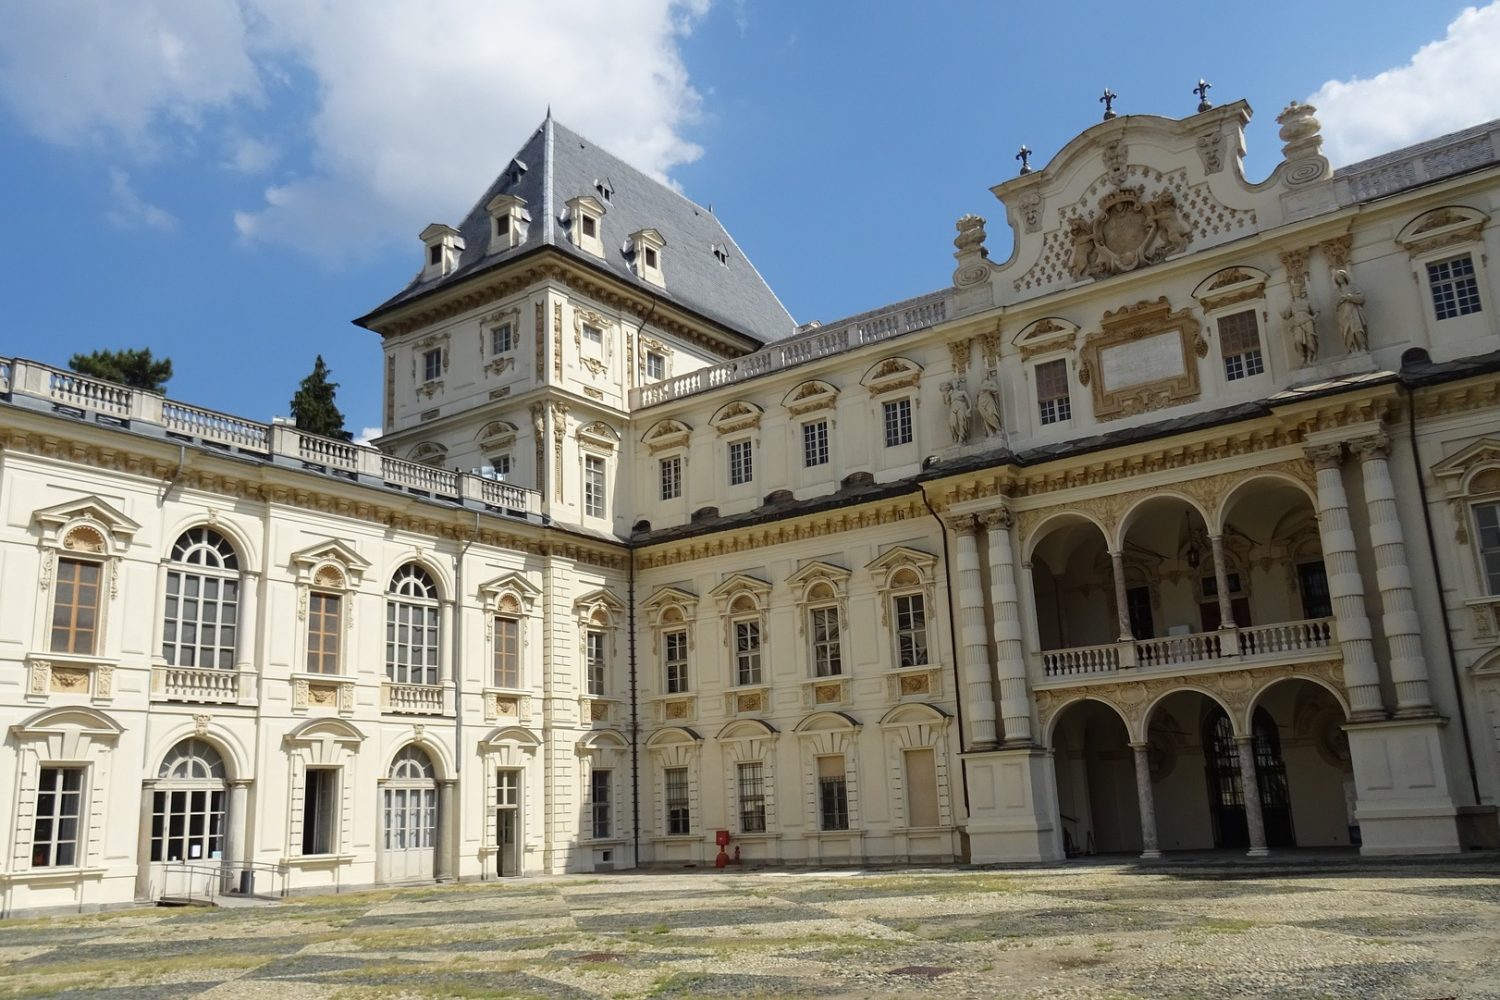 History and architecture to be found in Turin, at the start of this Piedmont bike tour